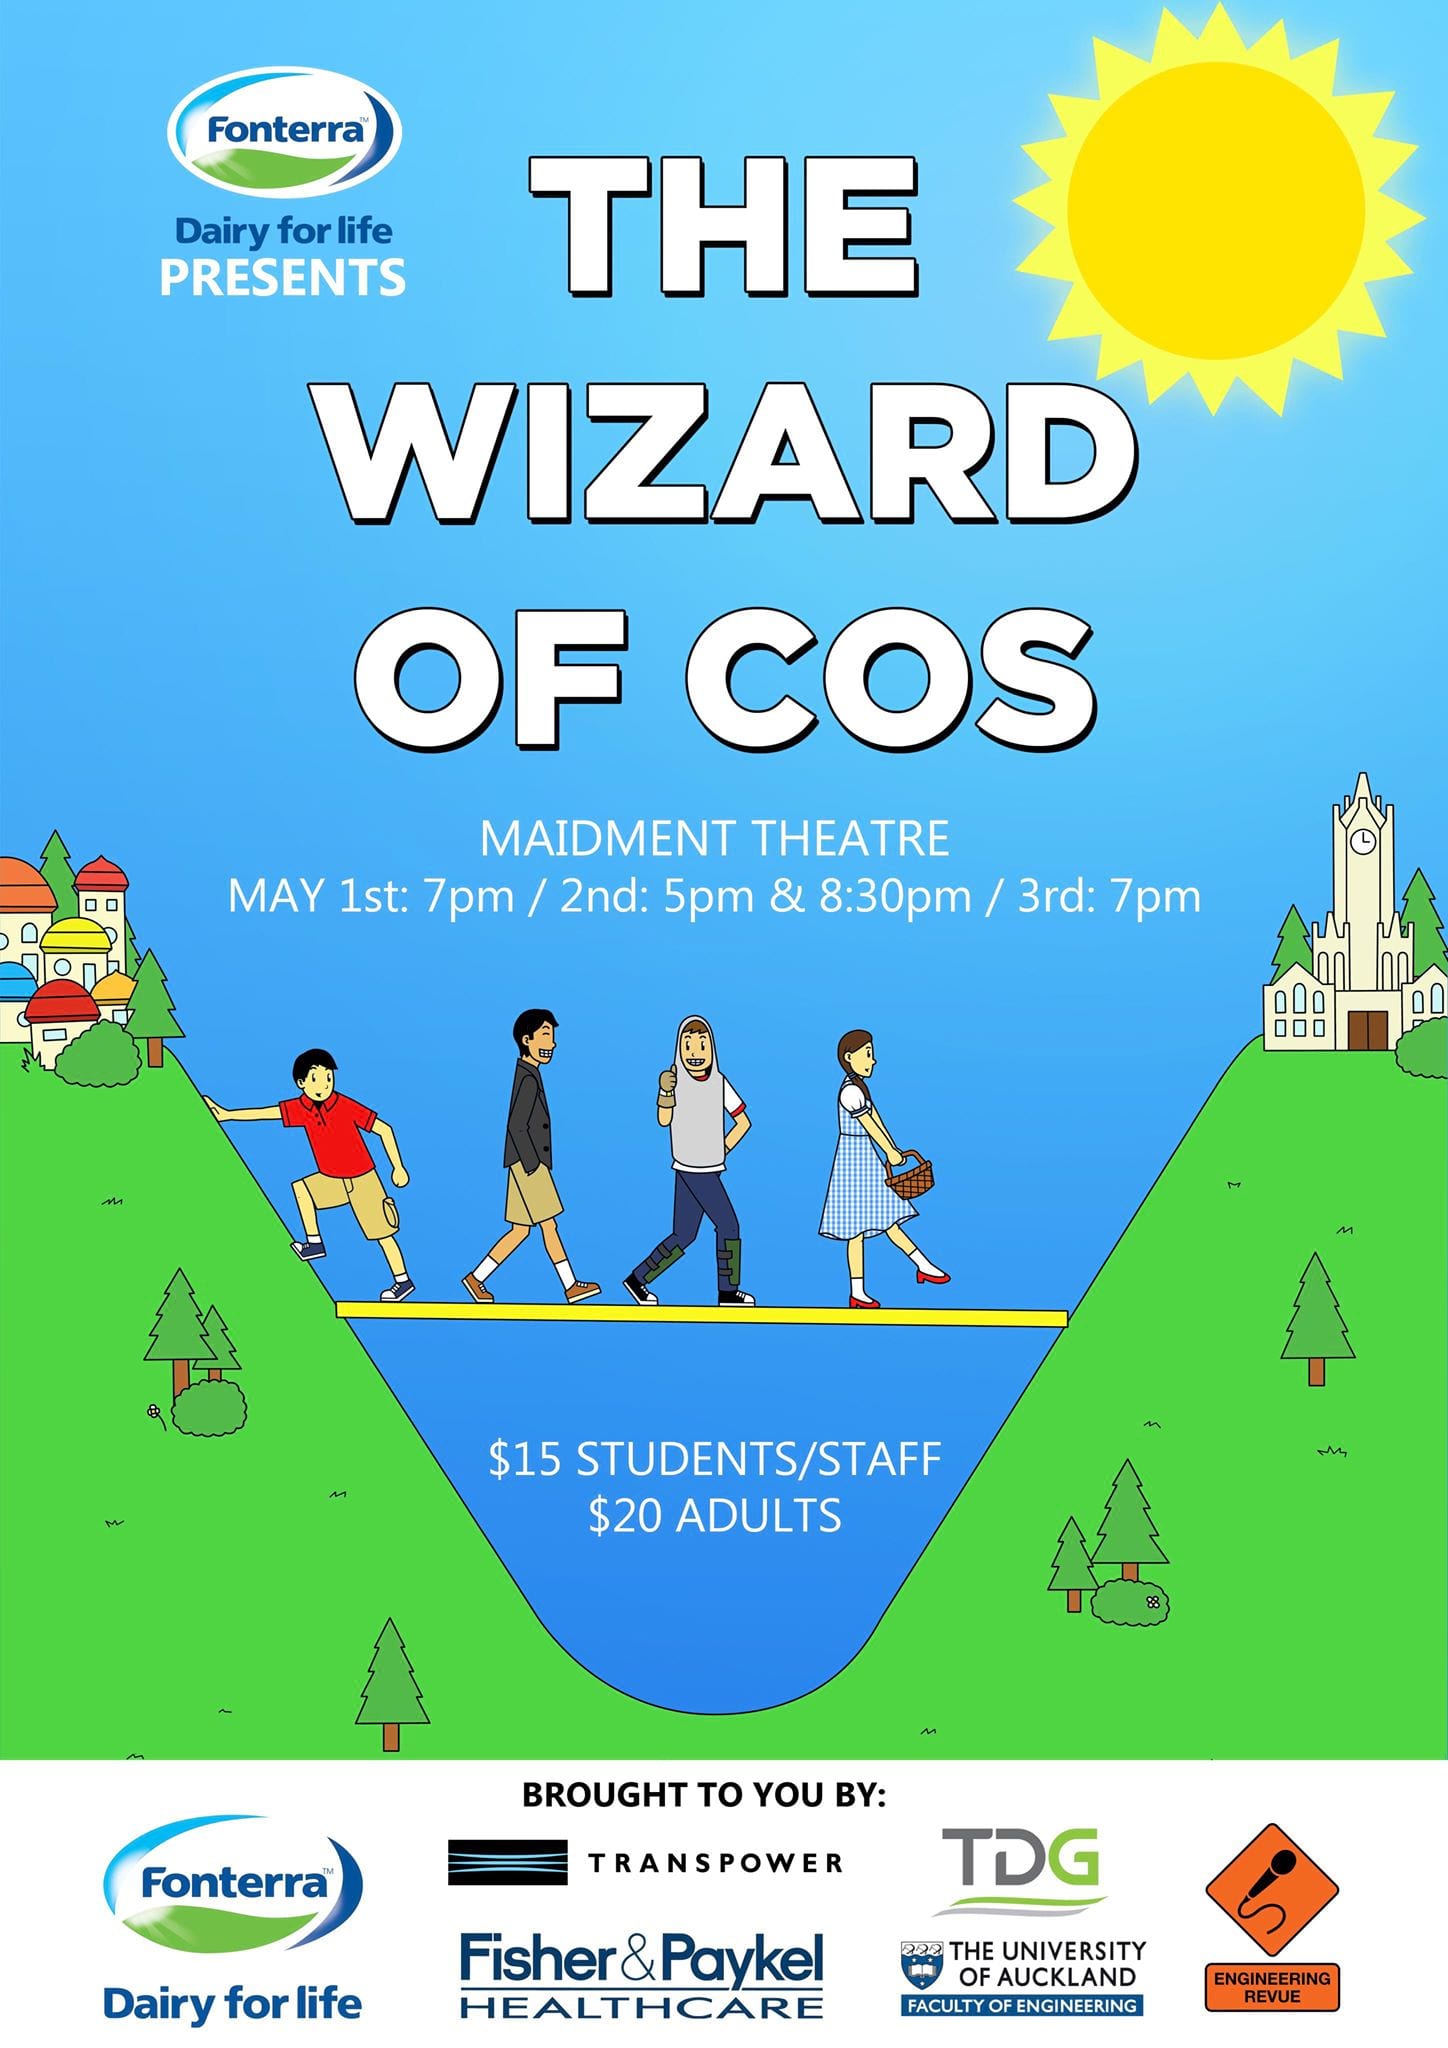 THE WIZARD OF COS